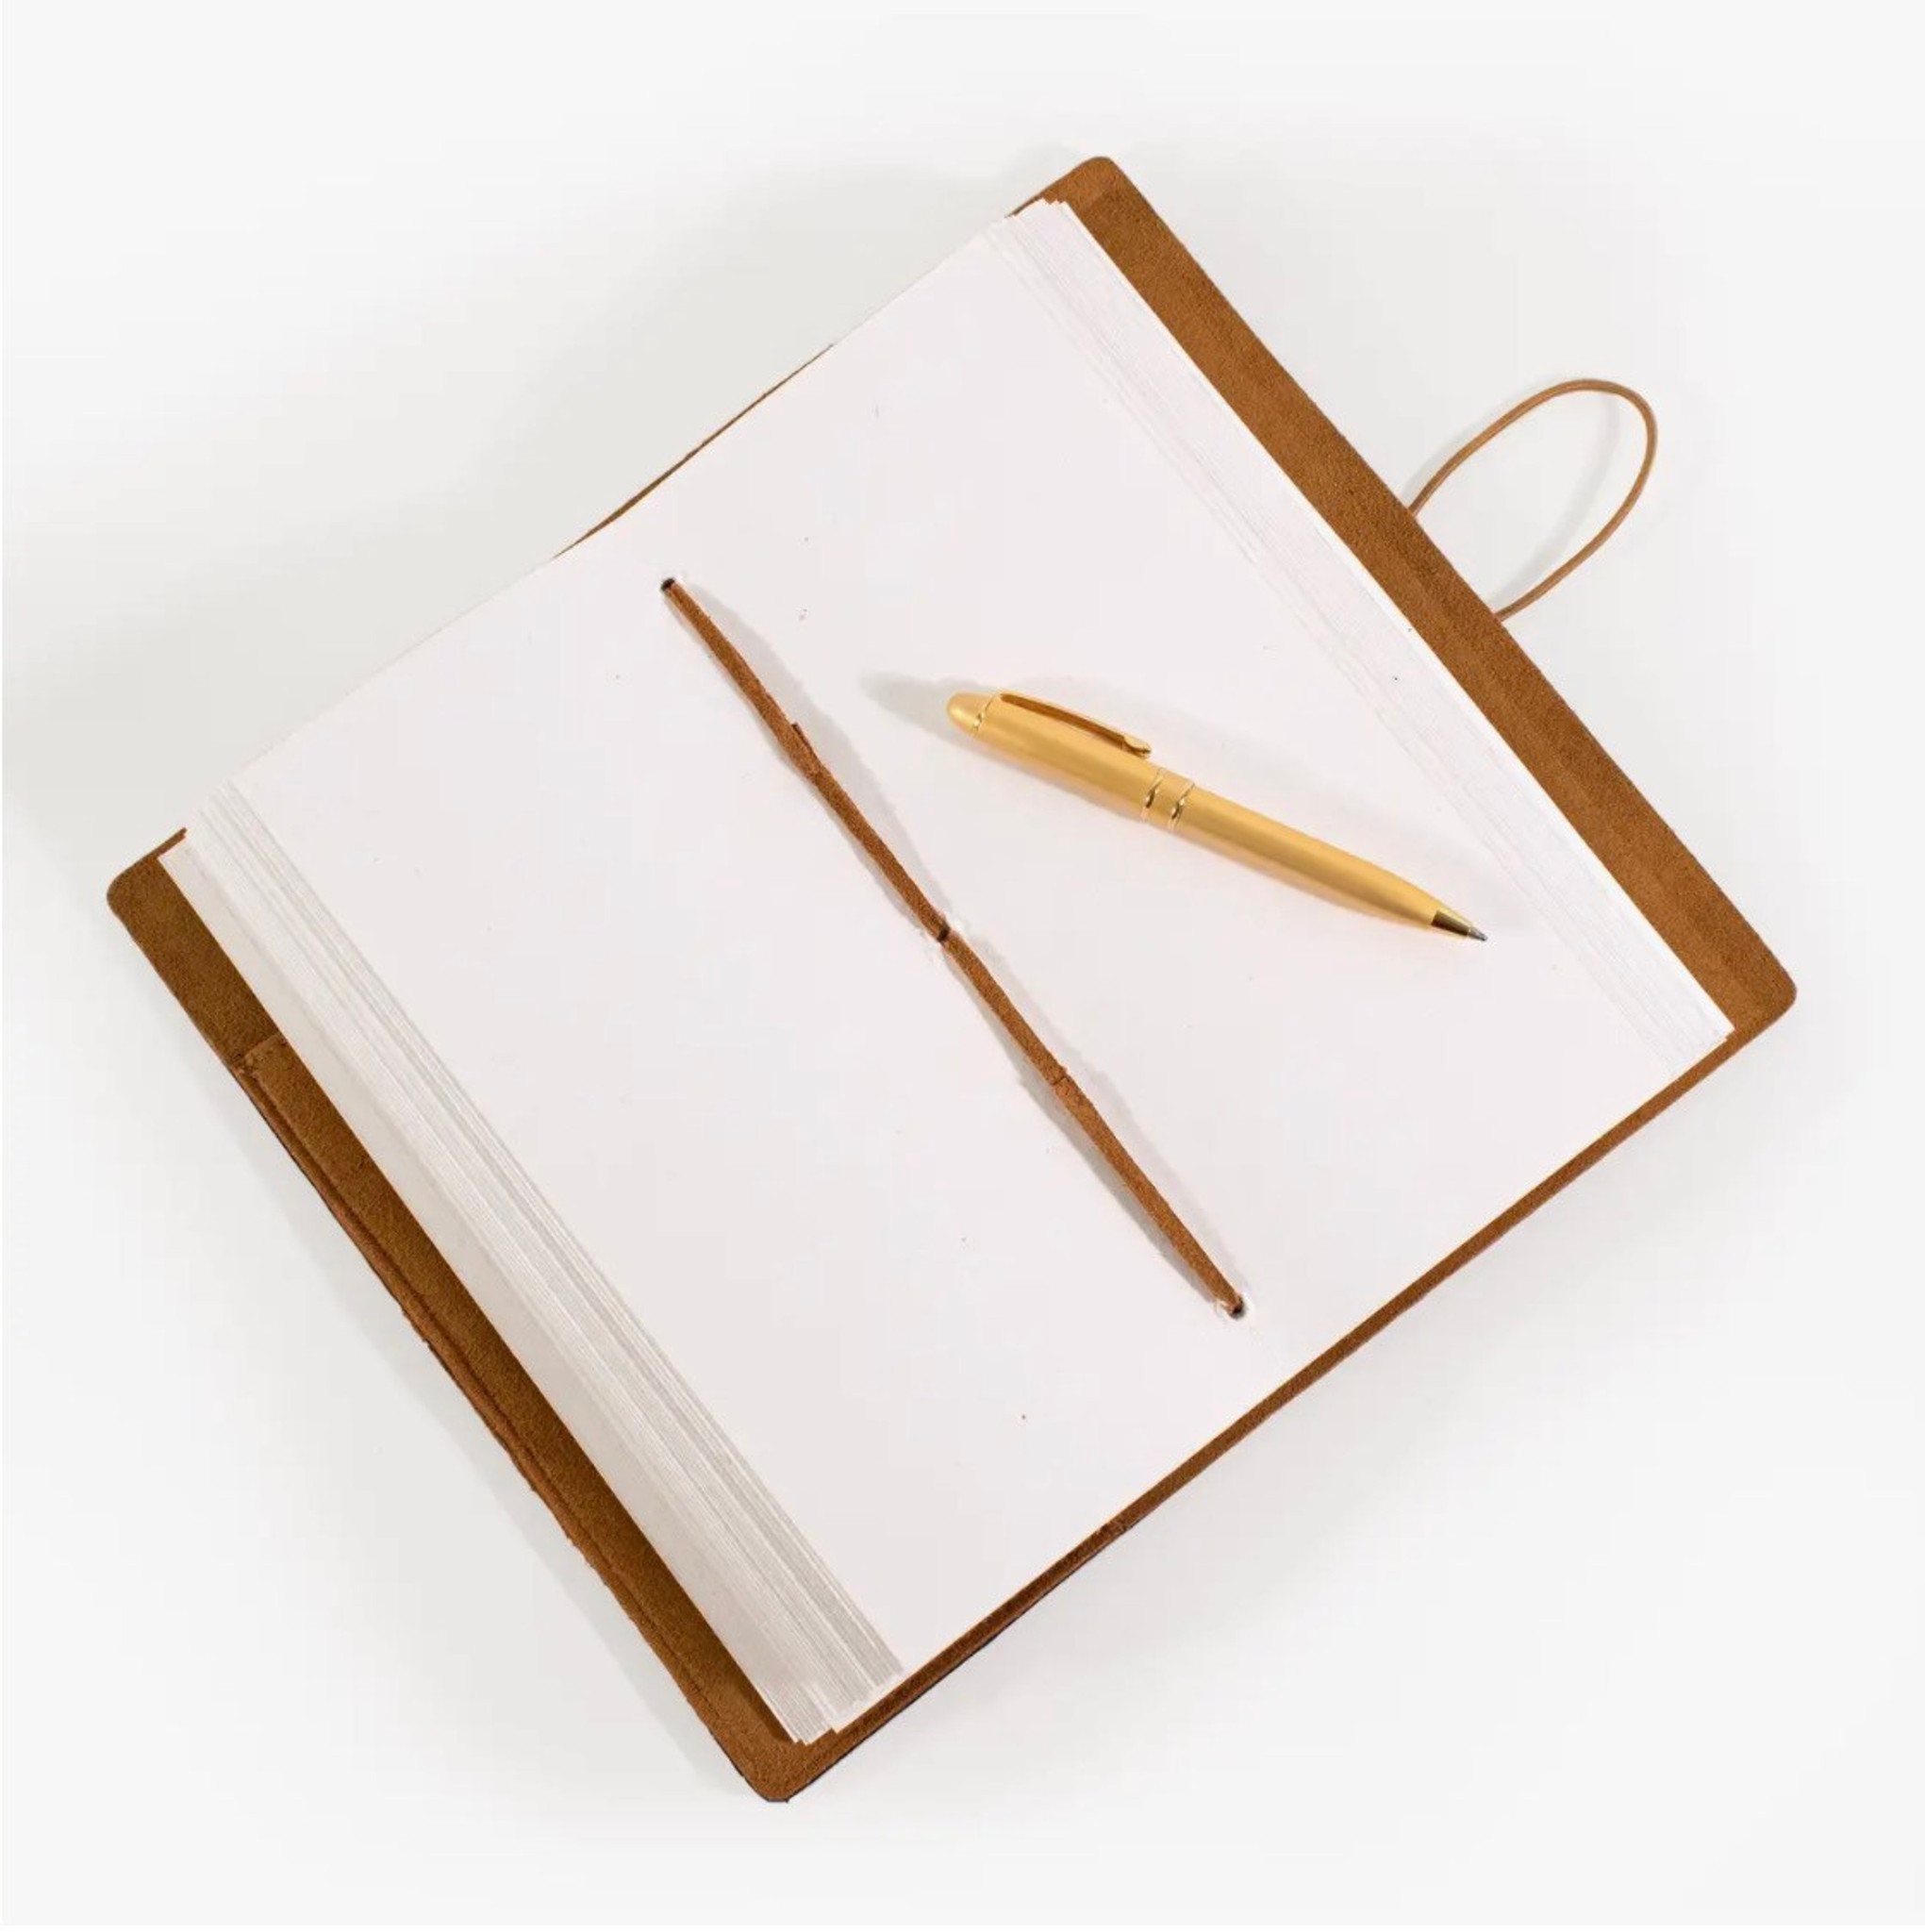 Andaluca Suede Leather Bound Journal with Organic Cotton Paper, Small 